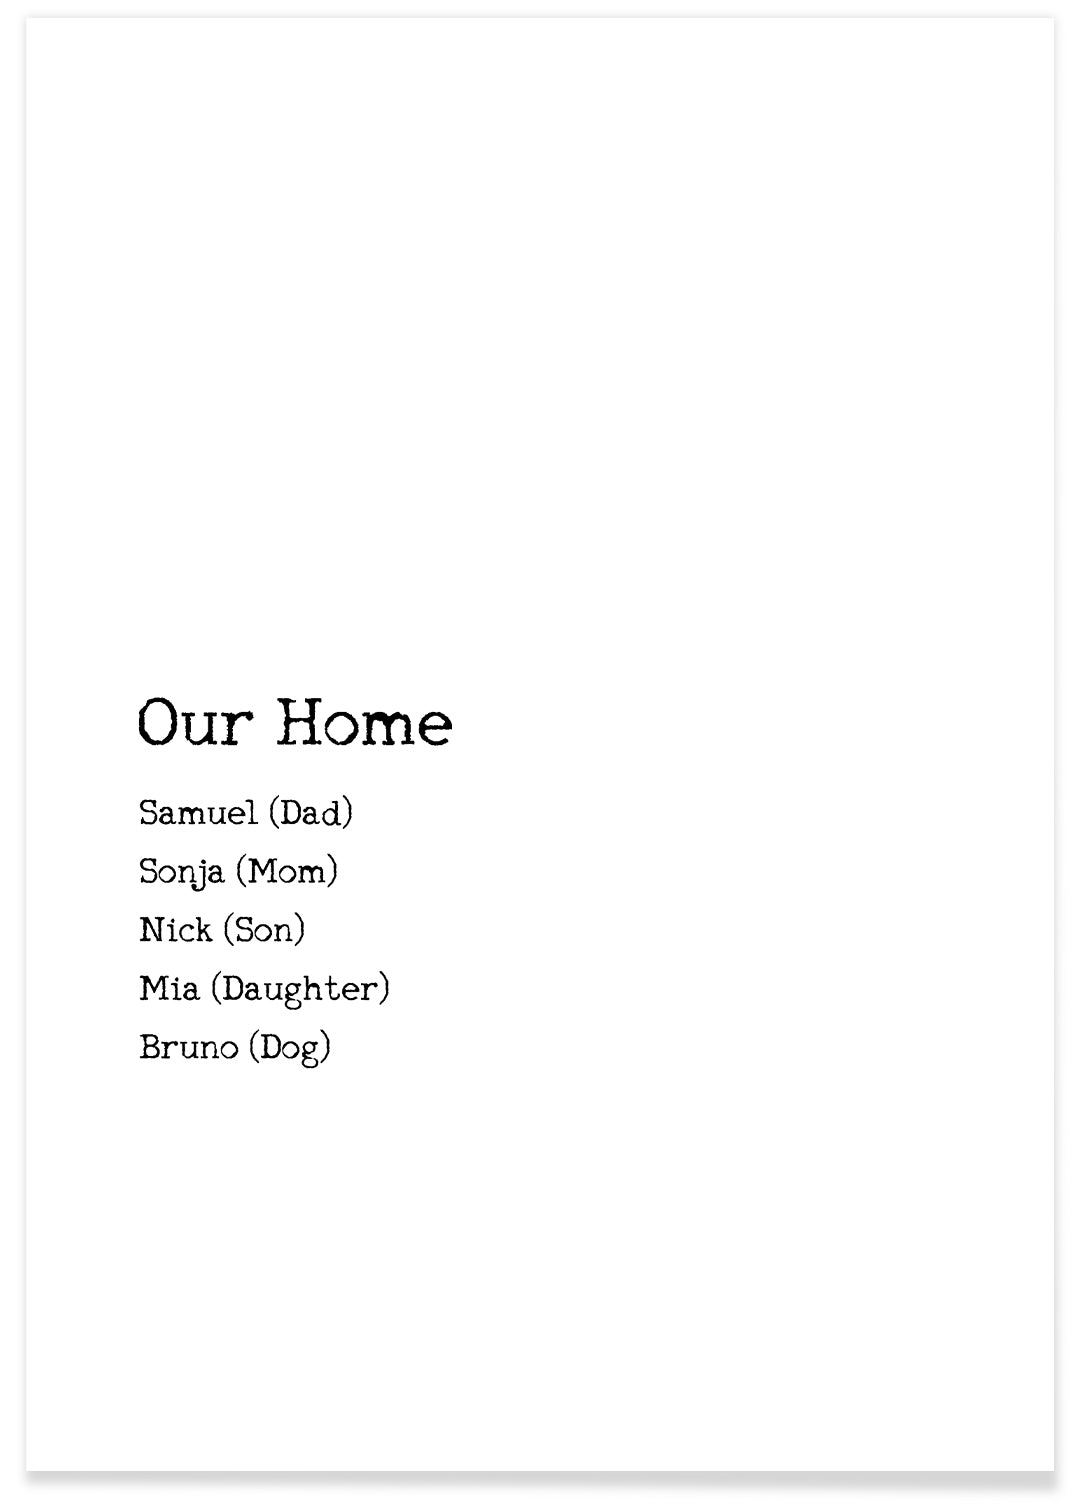 Poster"Our Home"